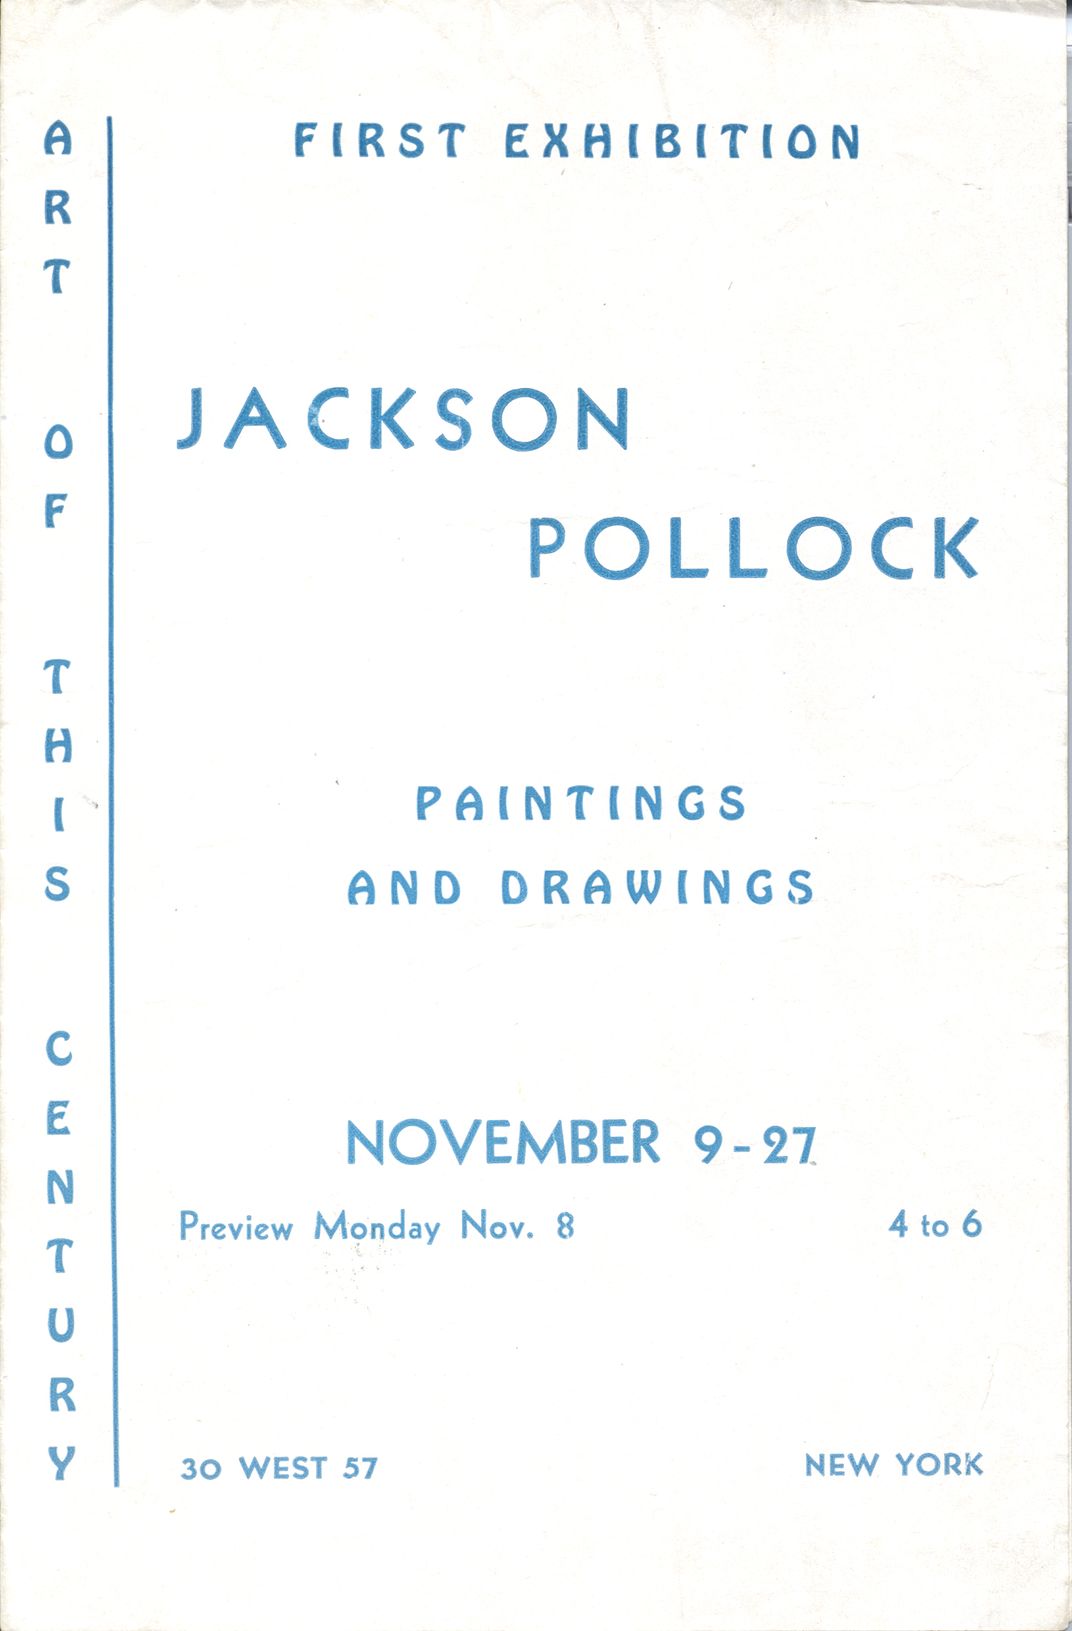 Catalog of Jackson Pollock exhibition at Betty Parsons Gallery